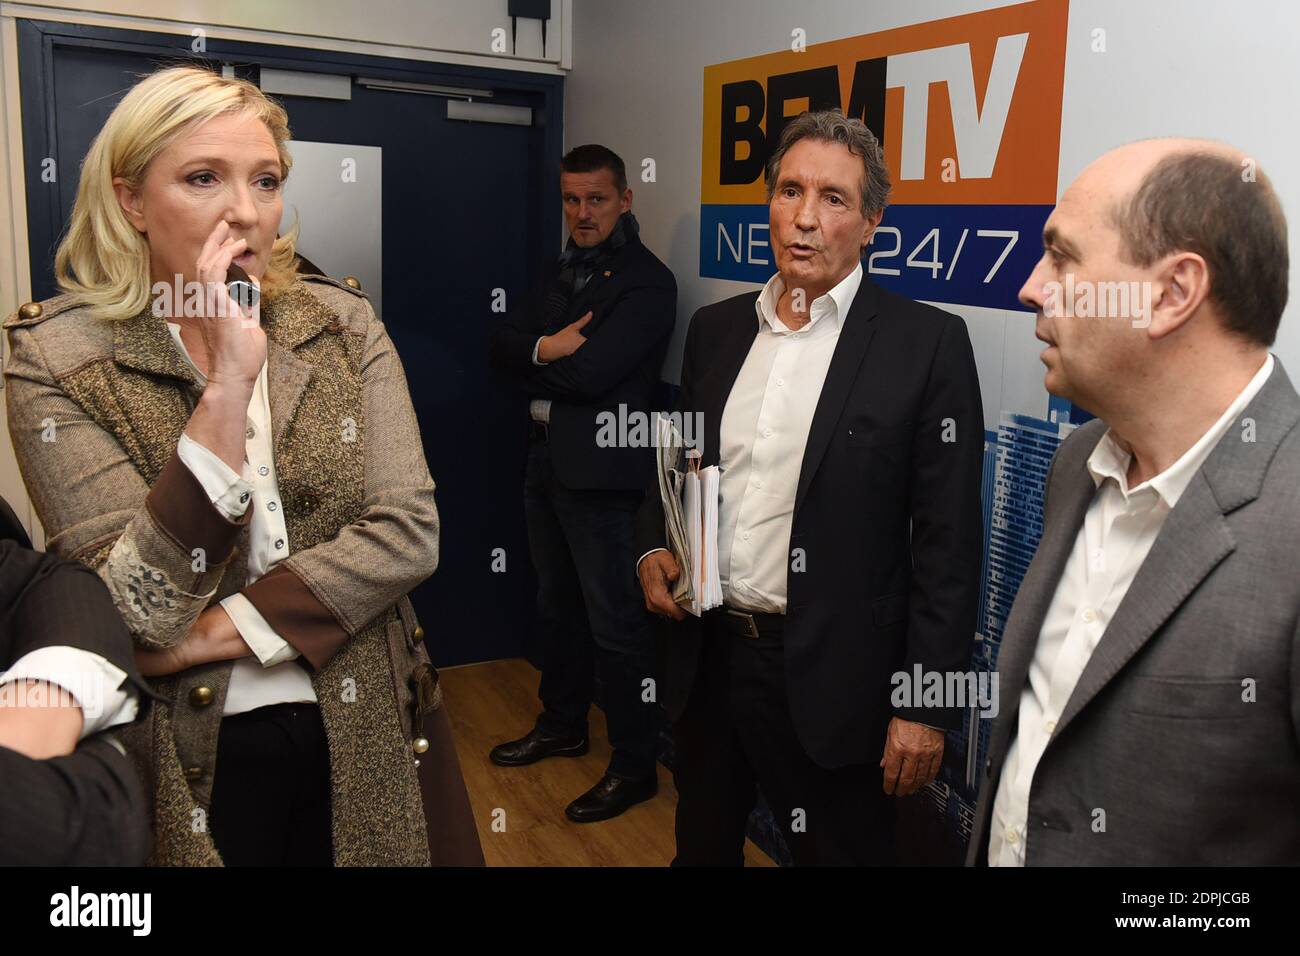 Exclusive - Marine Le Pen is interviewed by Jean-Jacques Bourdin on RMC  radio in Paris, France on September 24, 2015. Photo by Laurent  Zabulon/ABACAPRESS.COM Stock Photo - Alamy